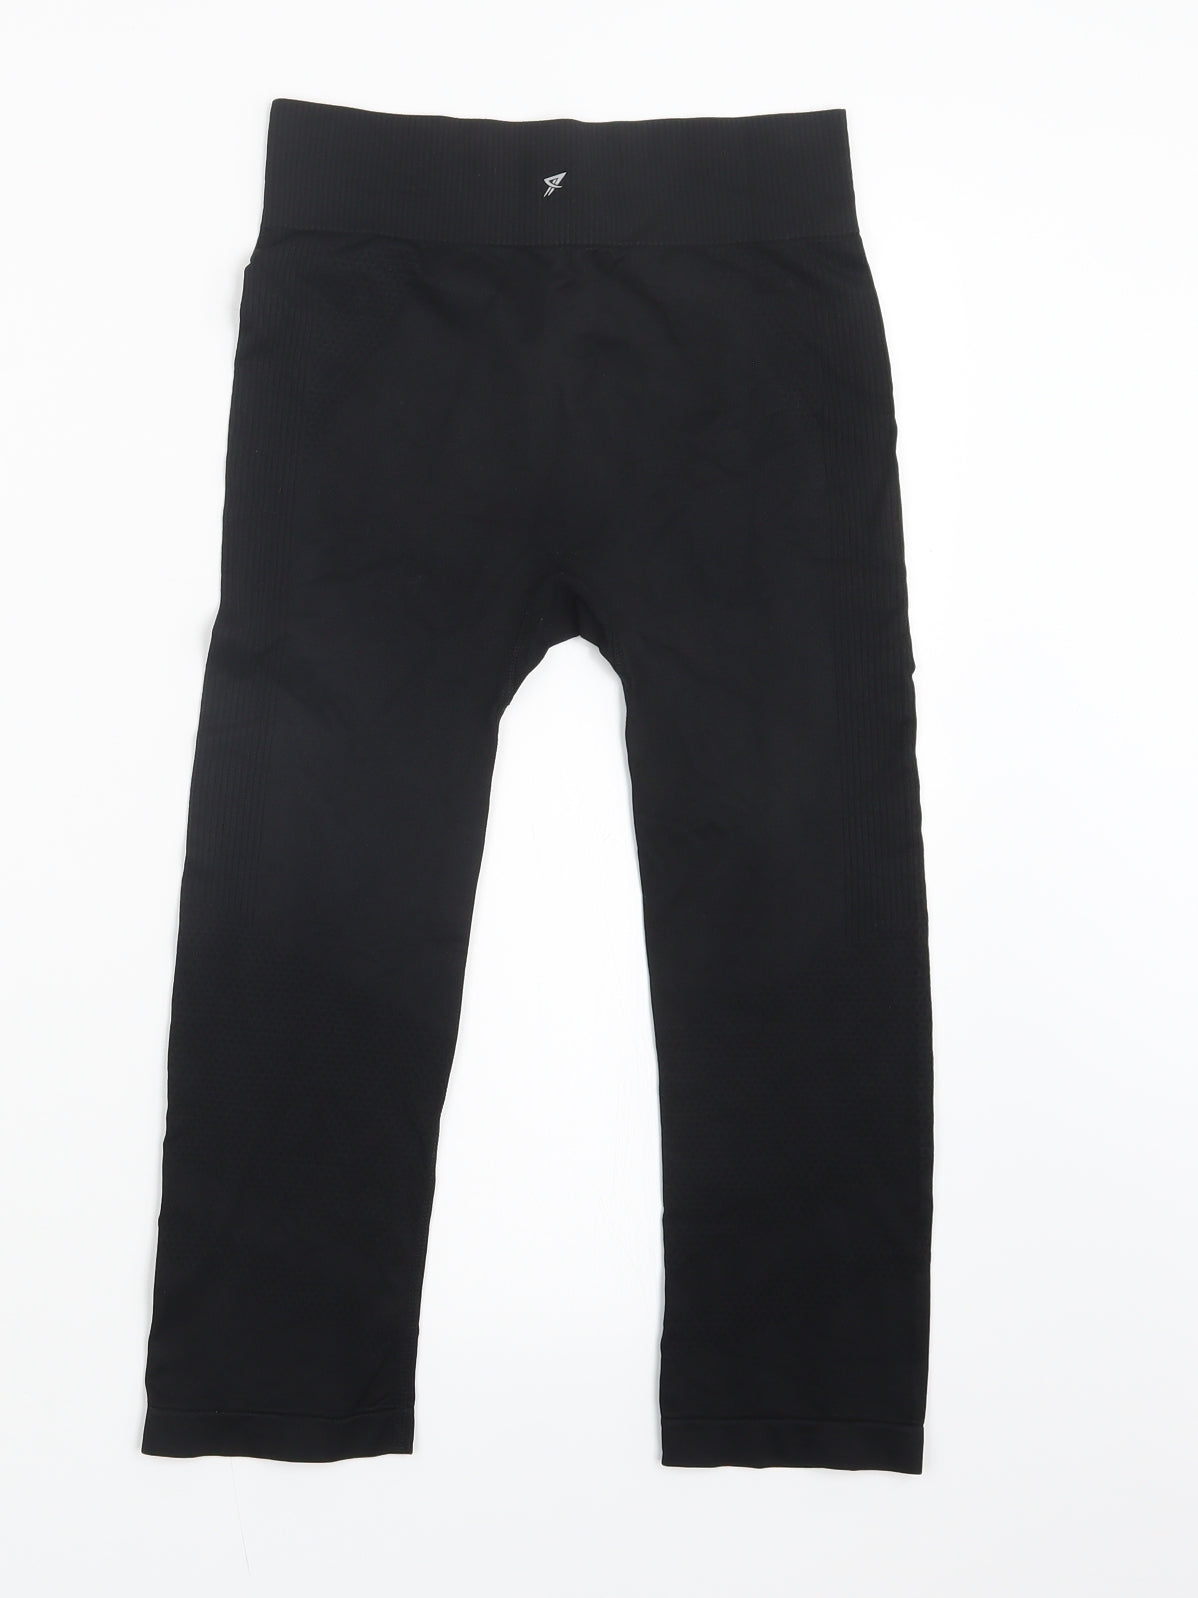 Workout Womens Black   Cropped Leggings Size 10 L18 in